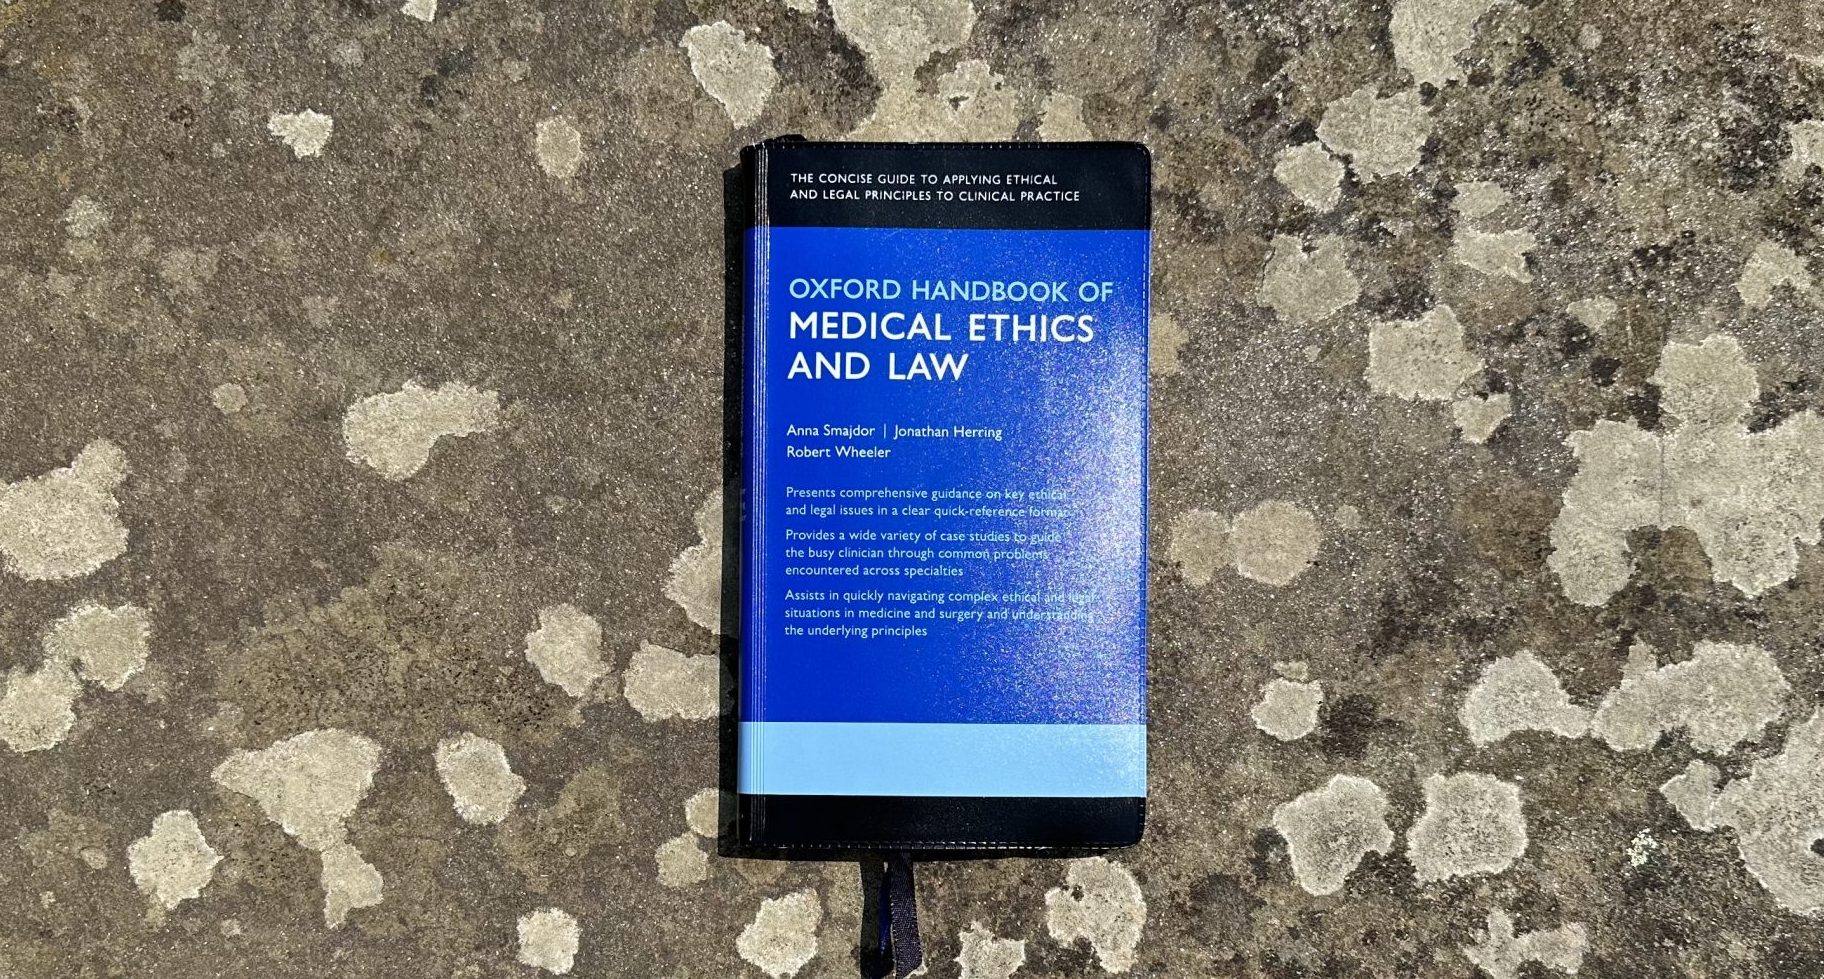 The Oxford handbook of medical ethics and law – BJGP Life